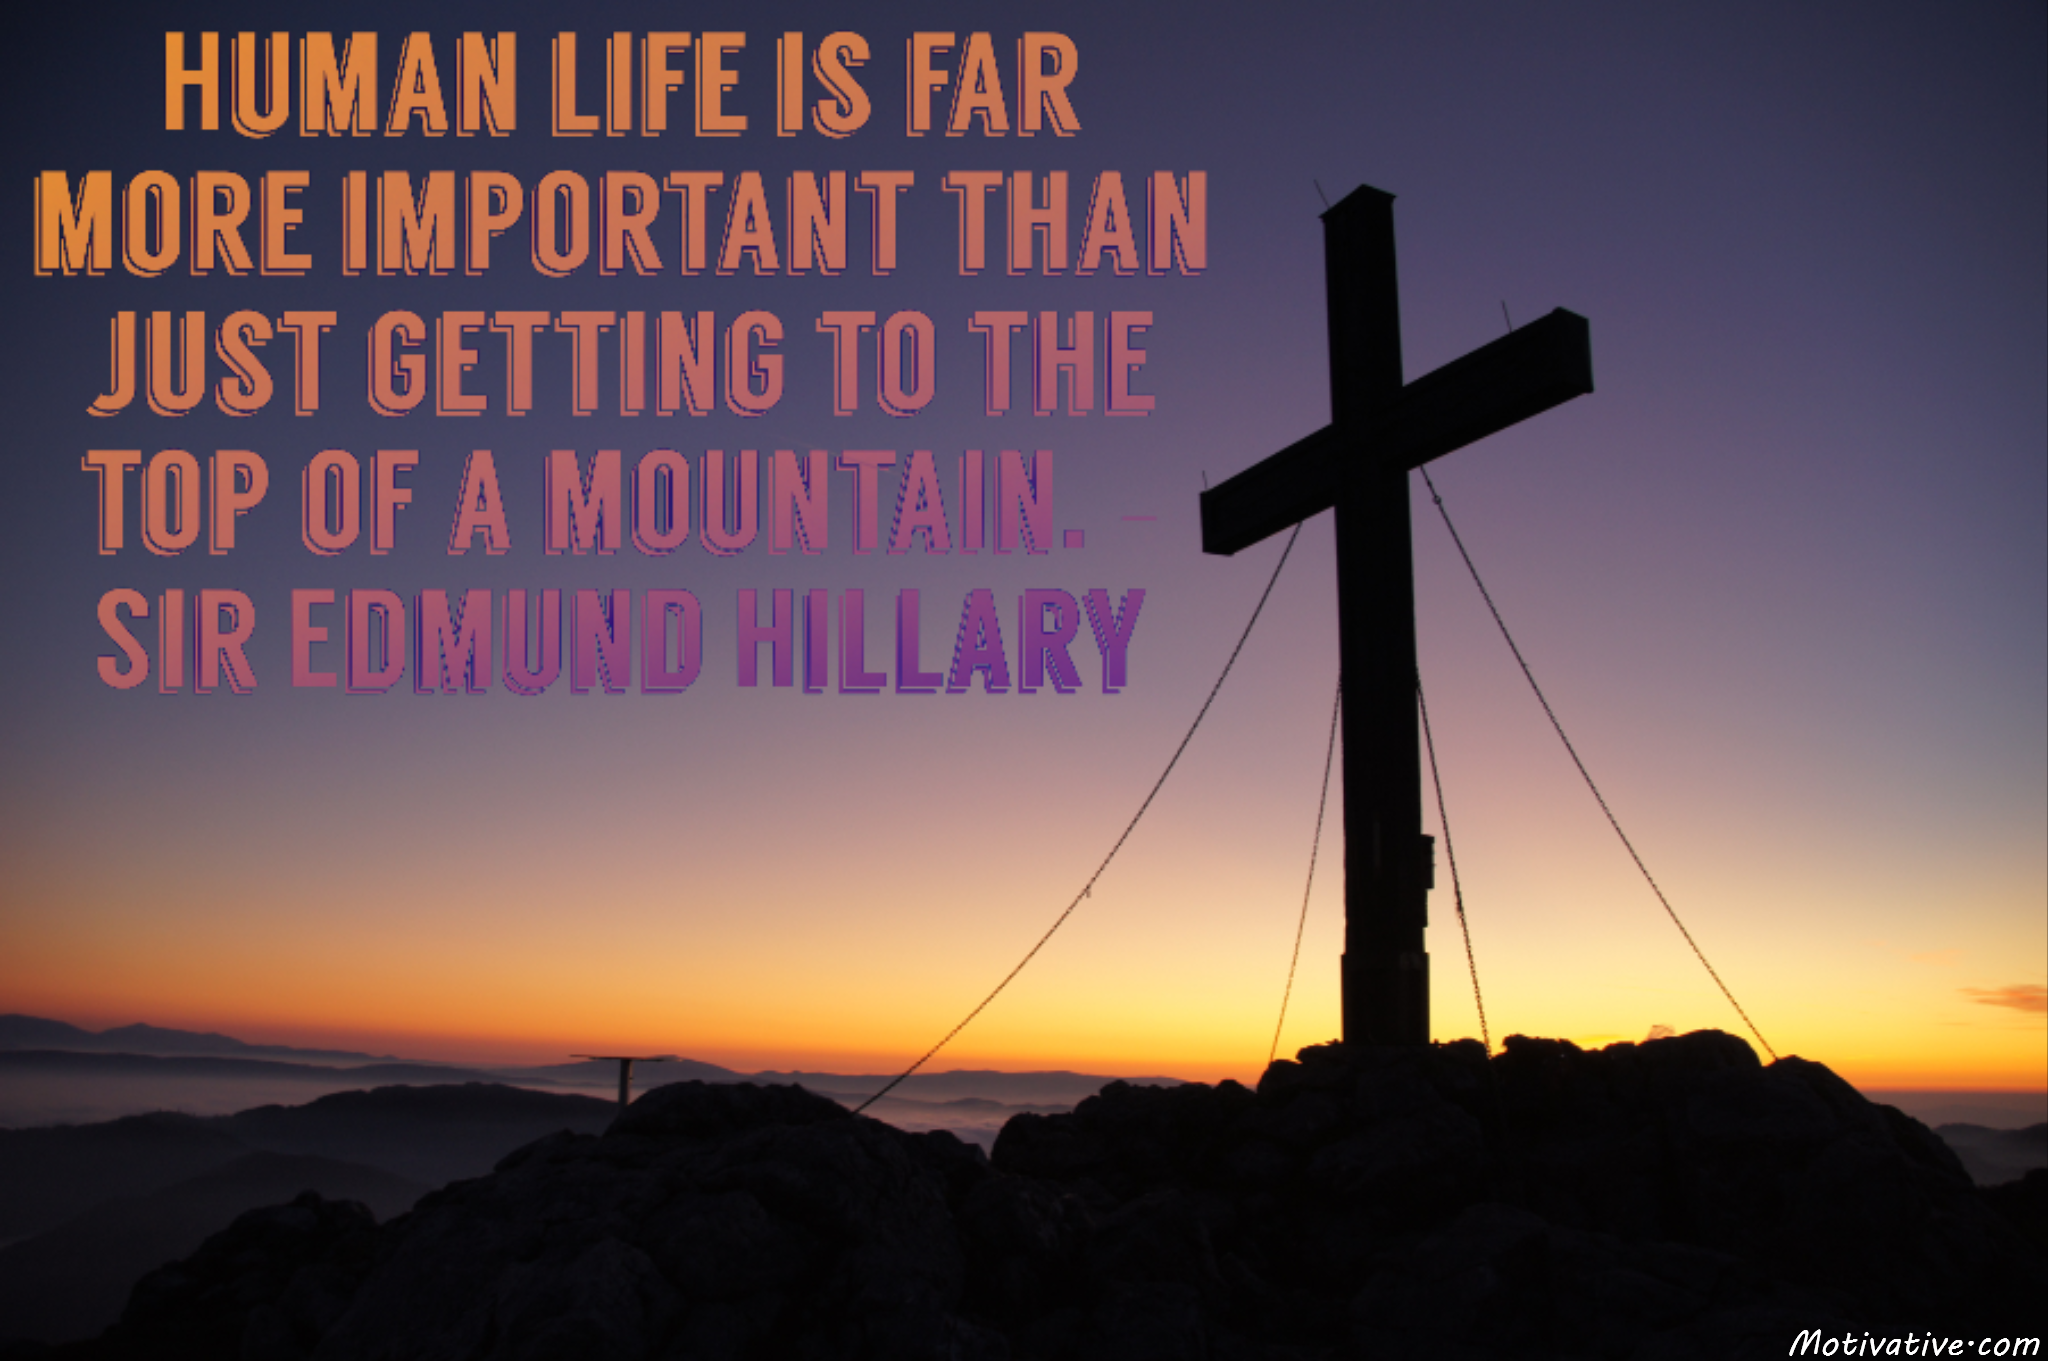 Human life is far more important than just getting to the top of a mountain. – Sir Edmund Hillary